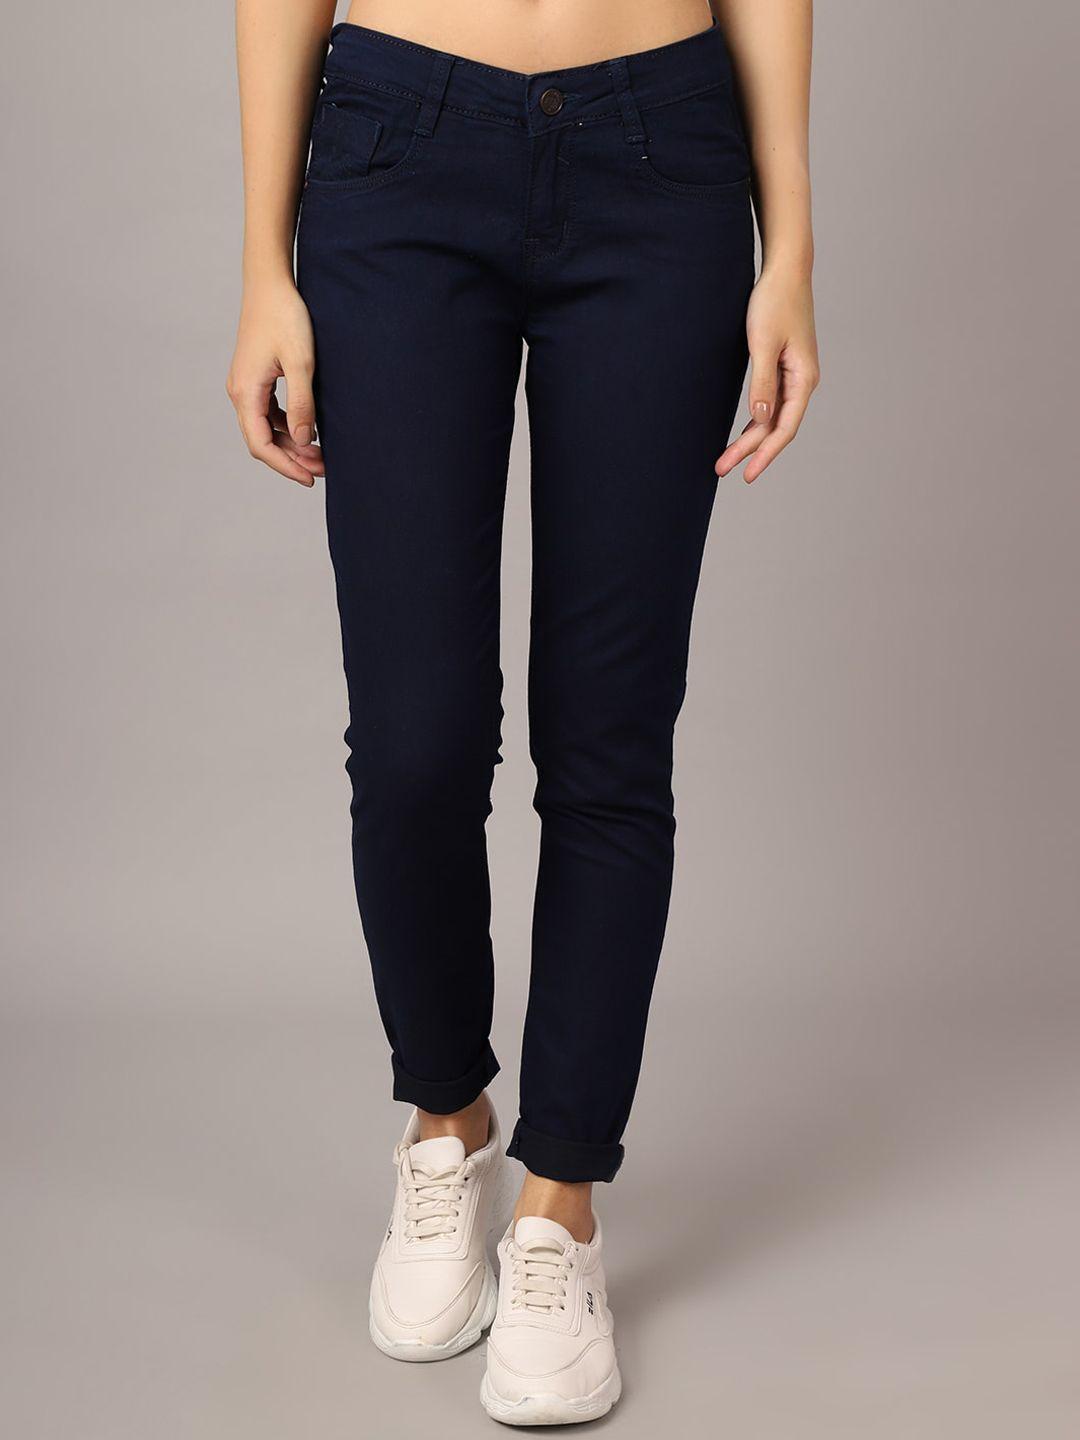 crozo by cantabil women blue mid rise jeans